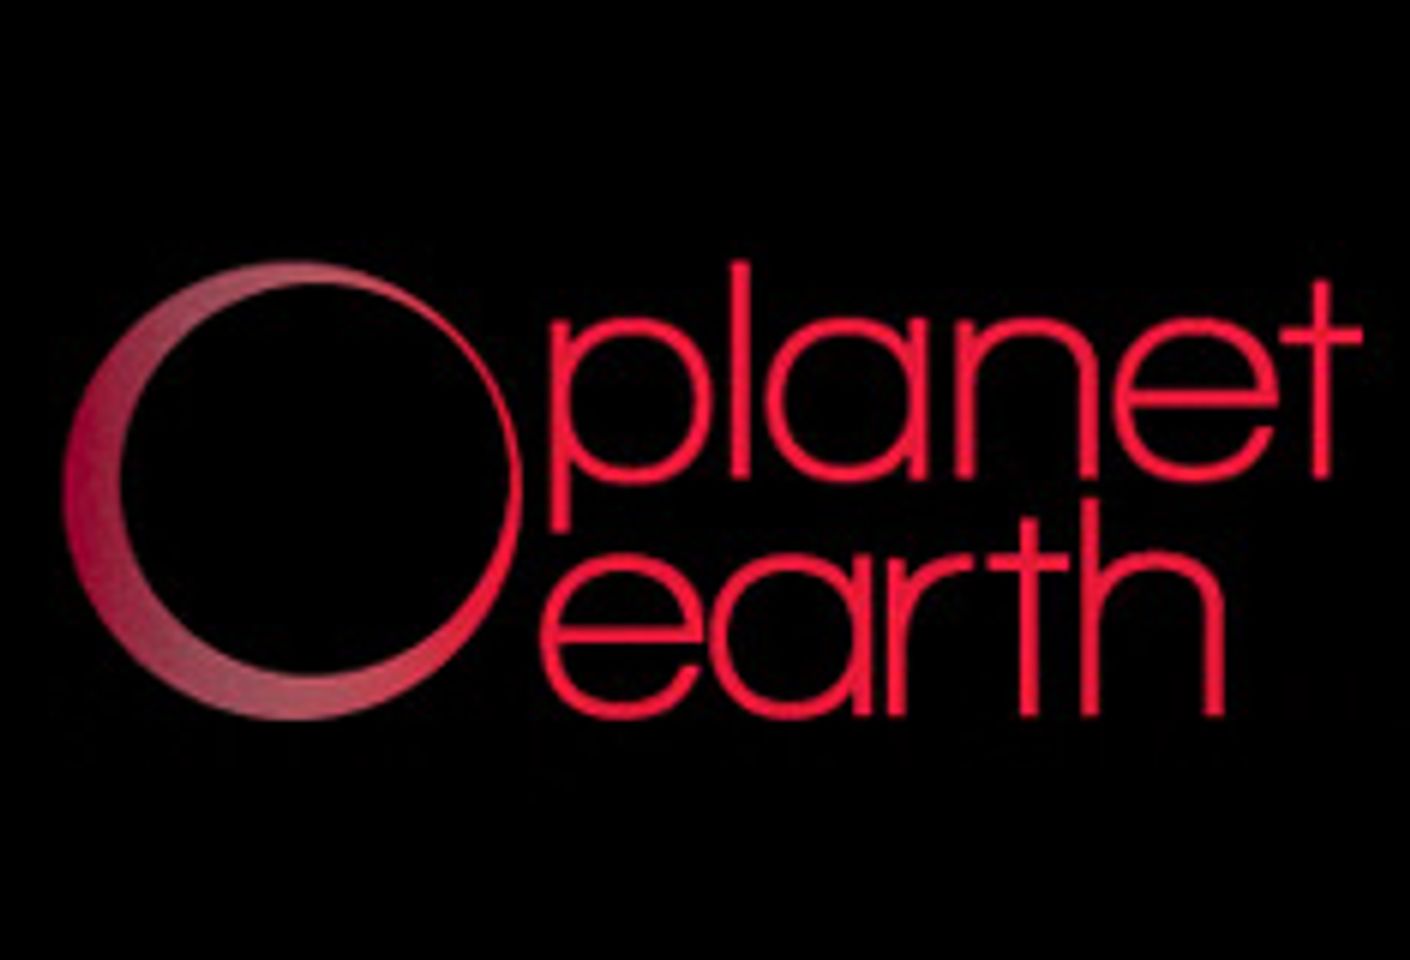 Planet Earth Adds 100 Shots Media Products to Its Portfolio